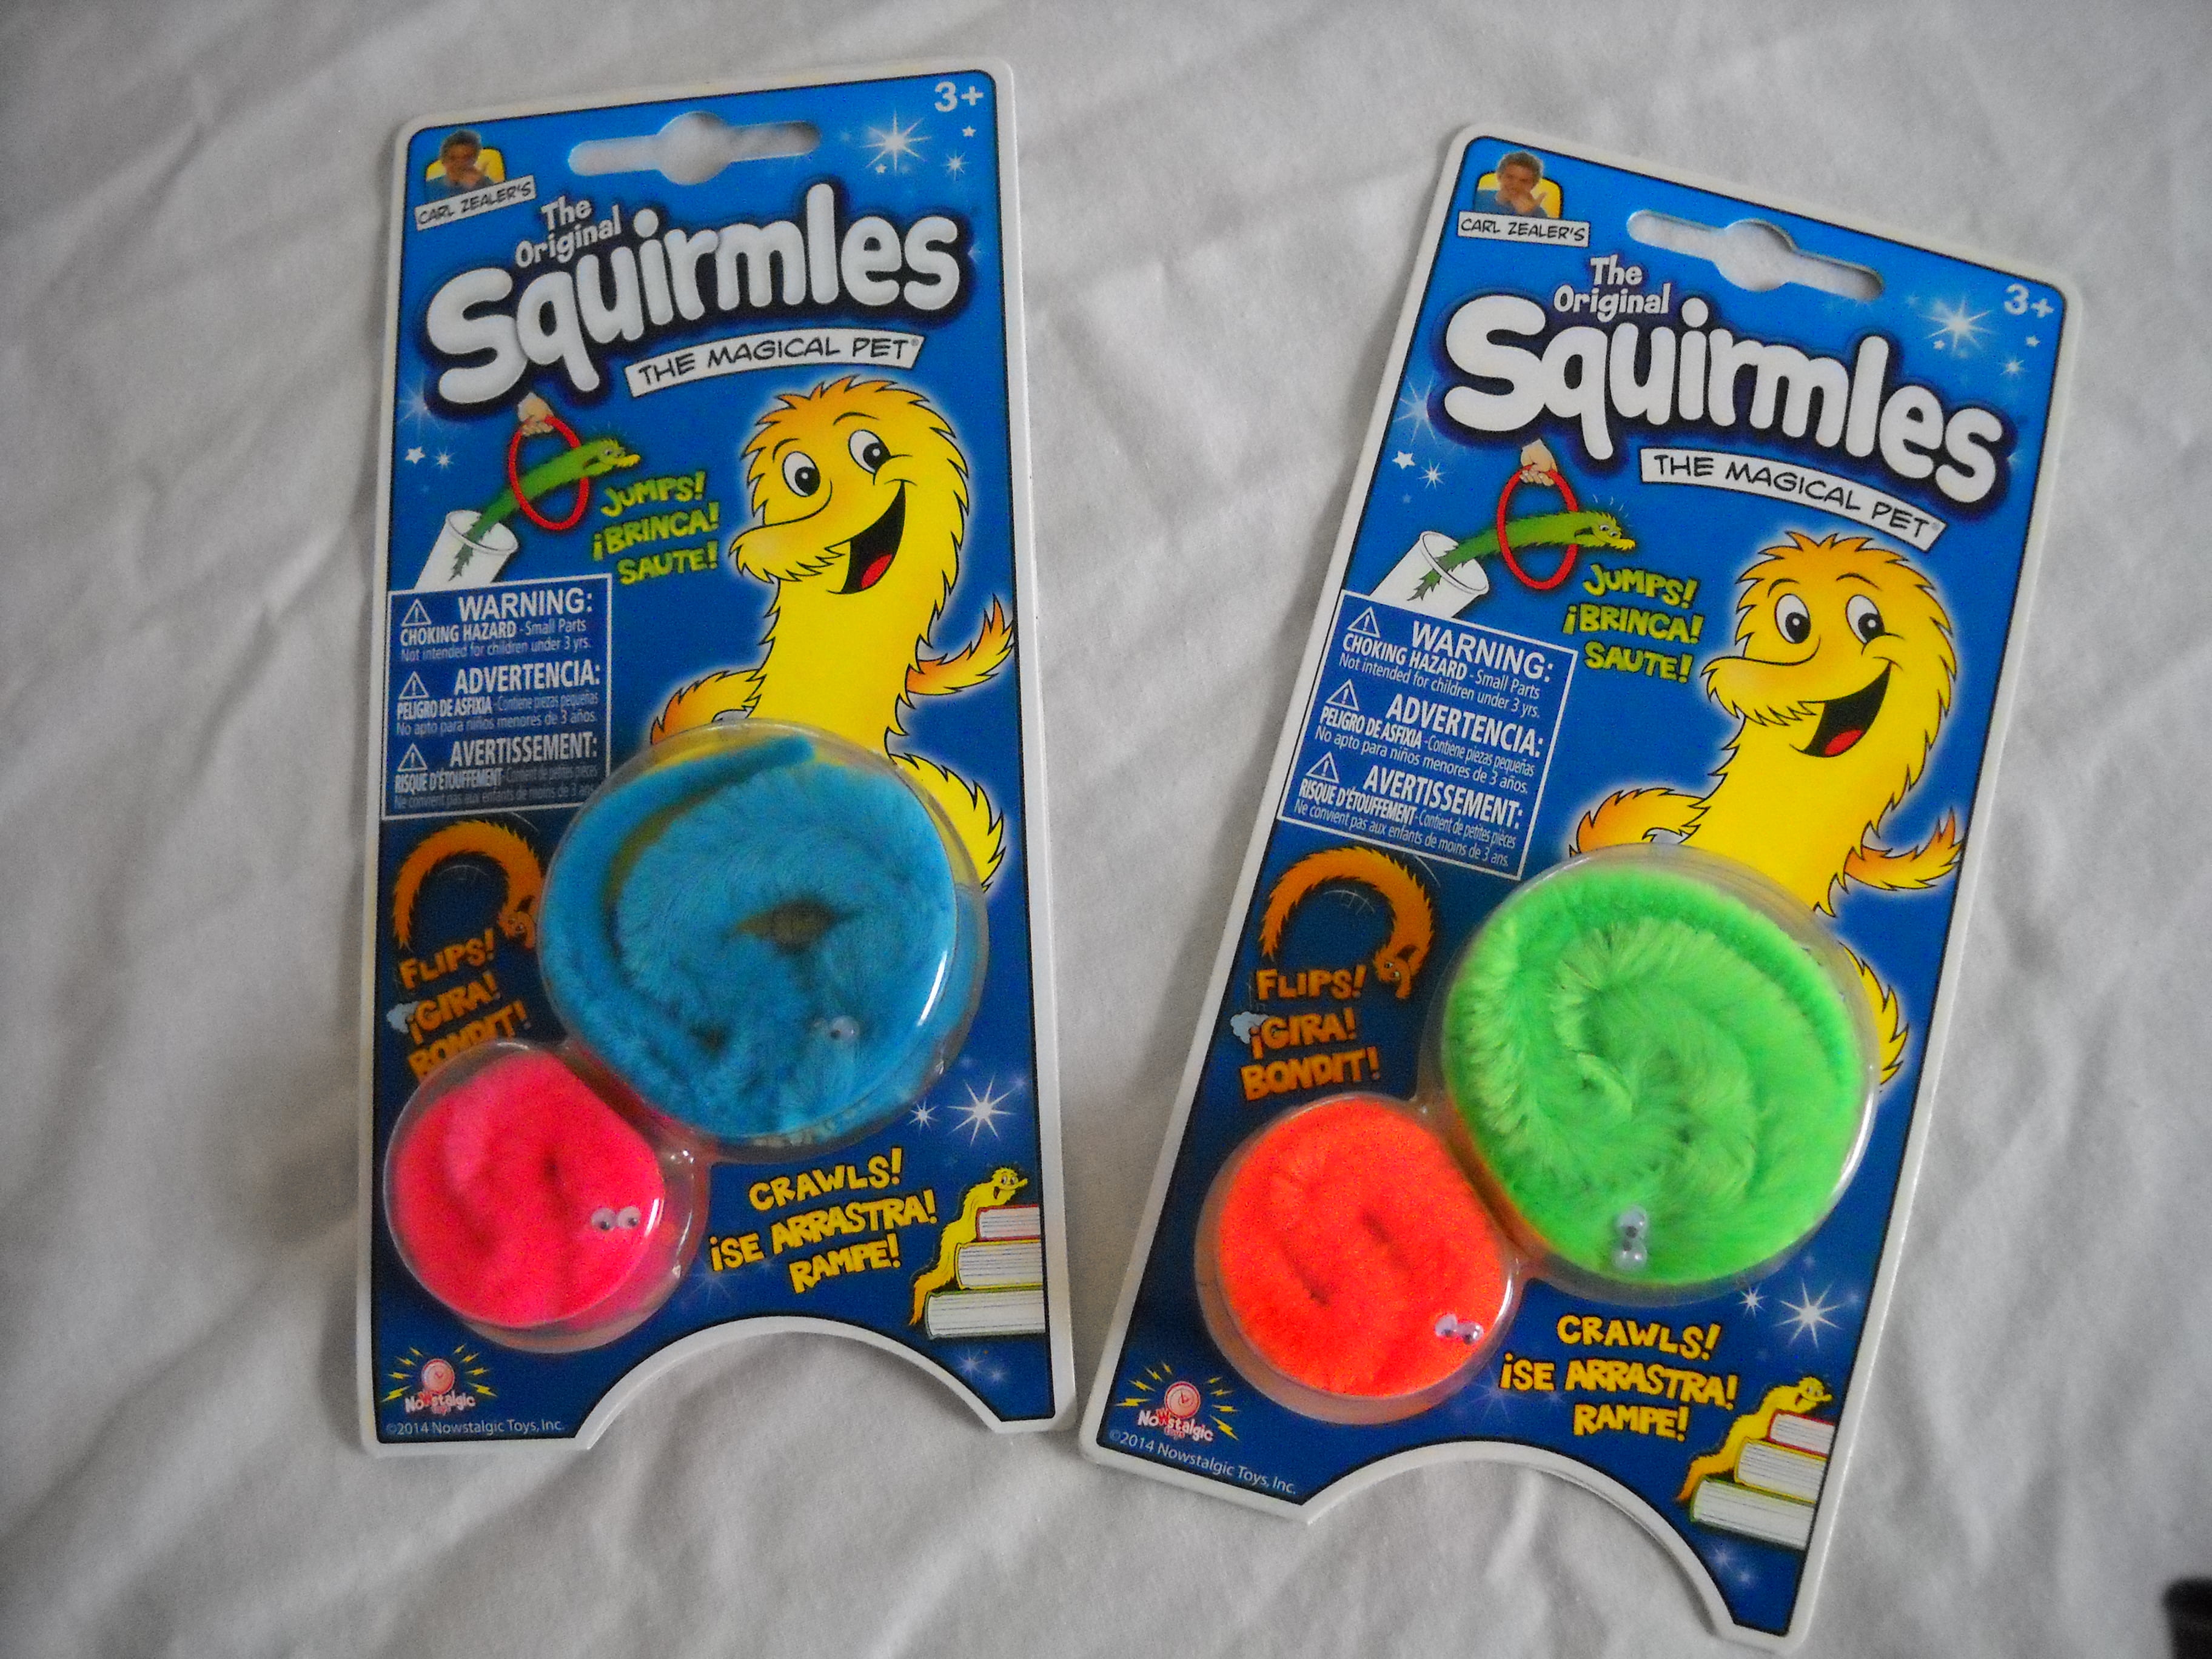 The Original Magical Pet w/baby Squirmles for fun tricks 2 packs of Squirmles 